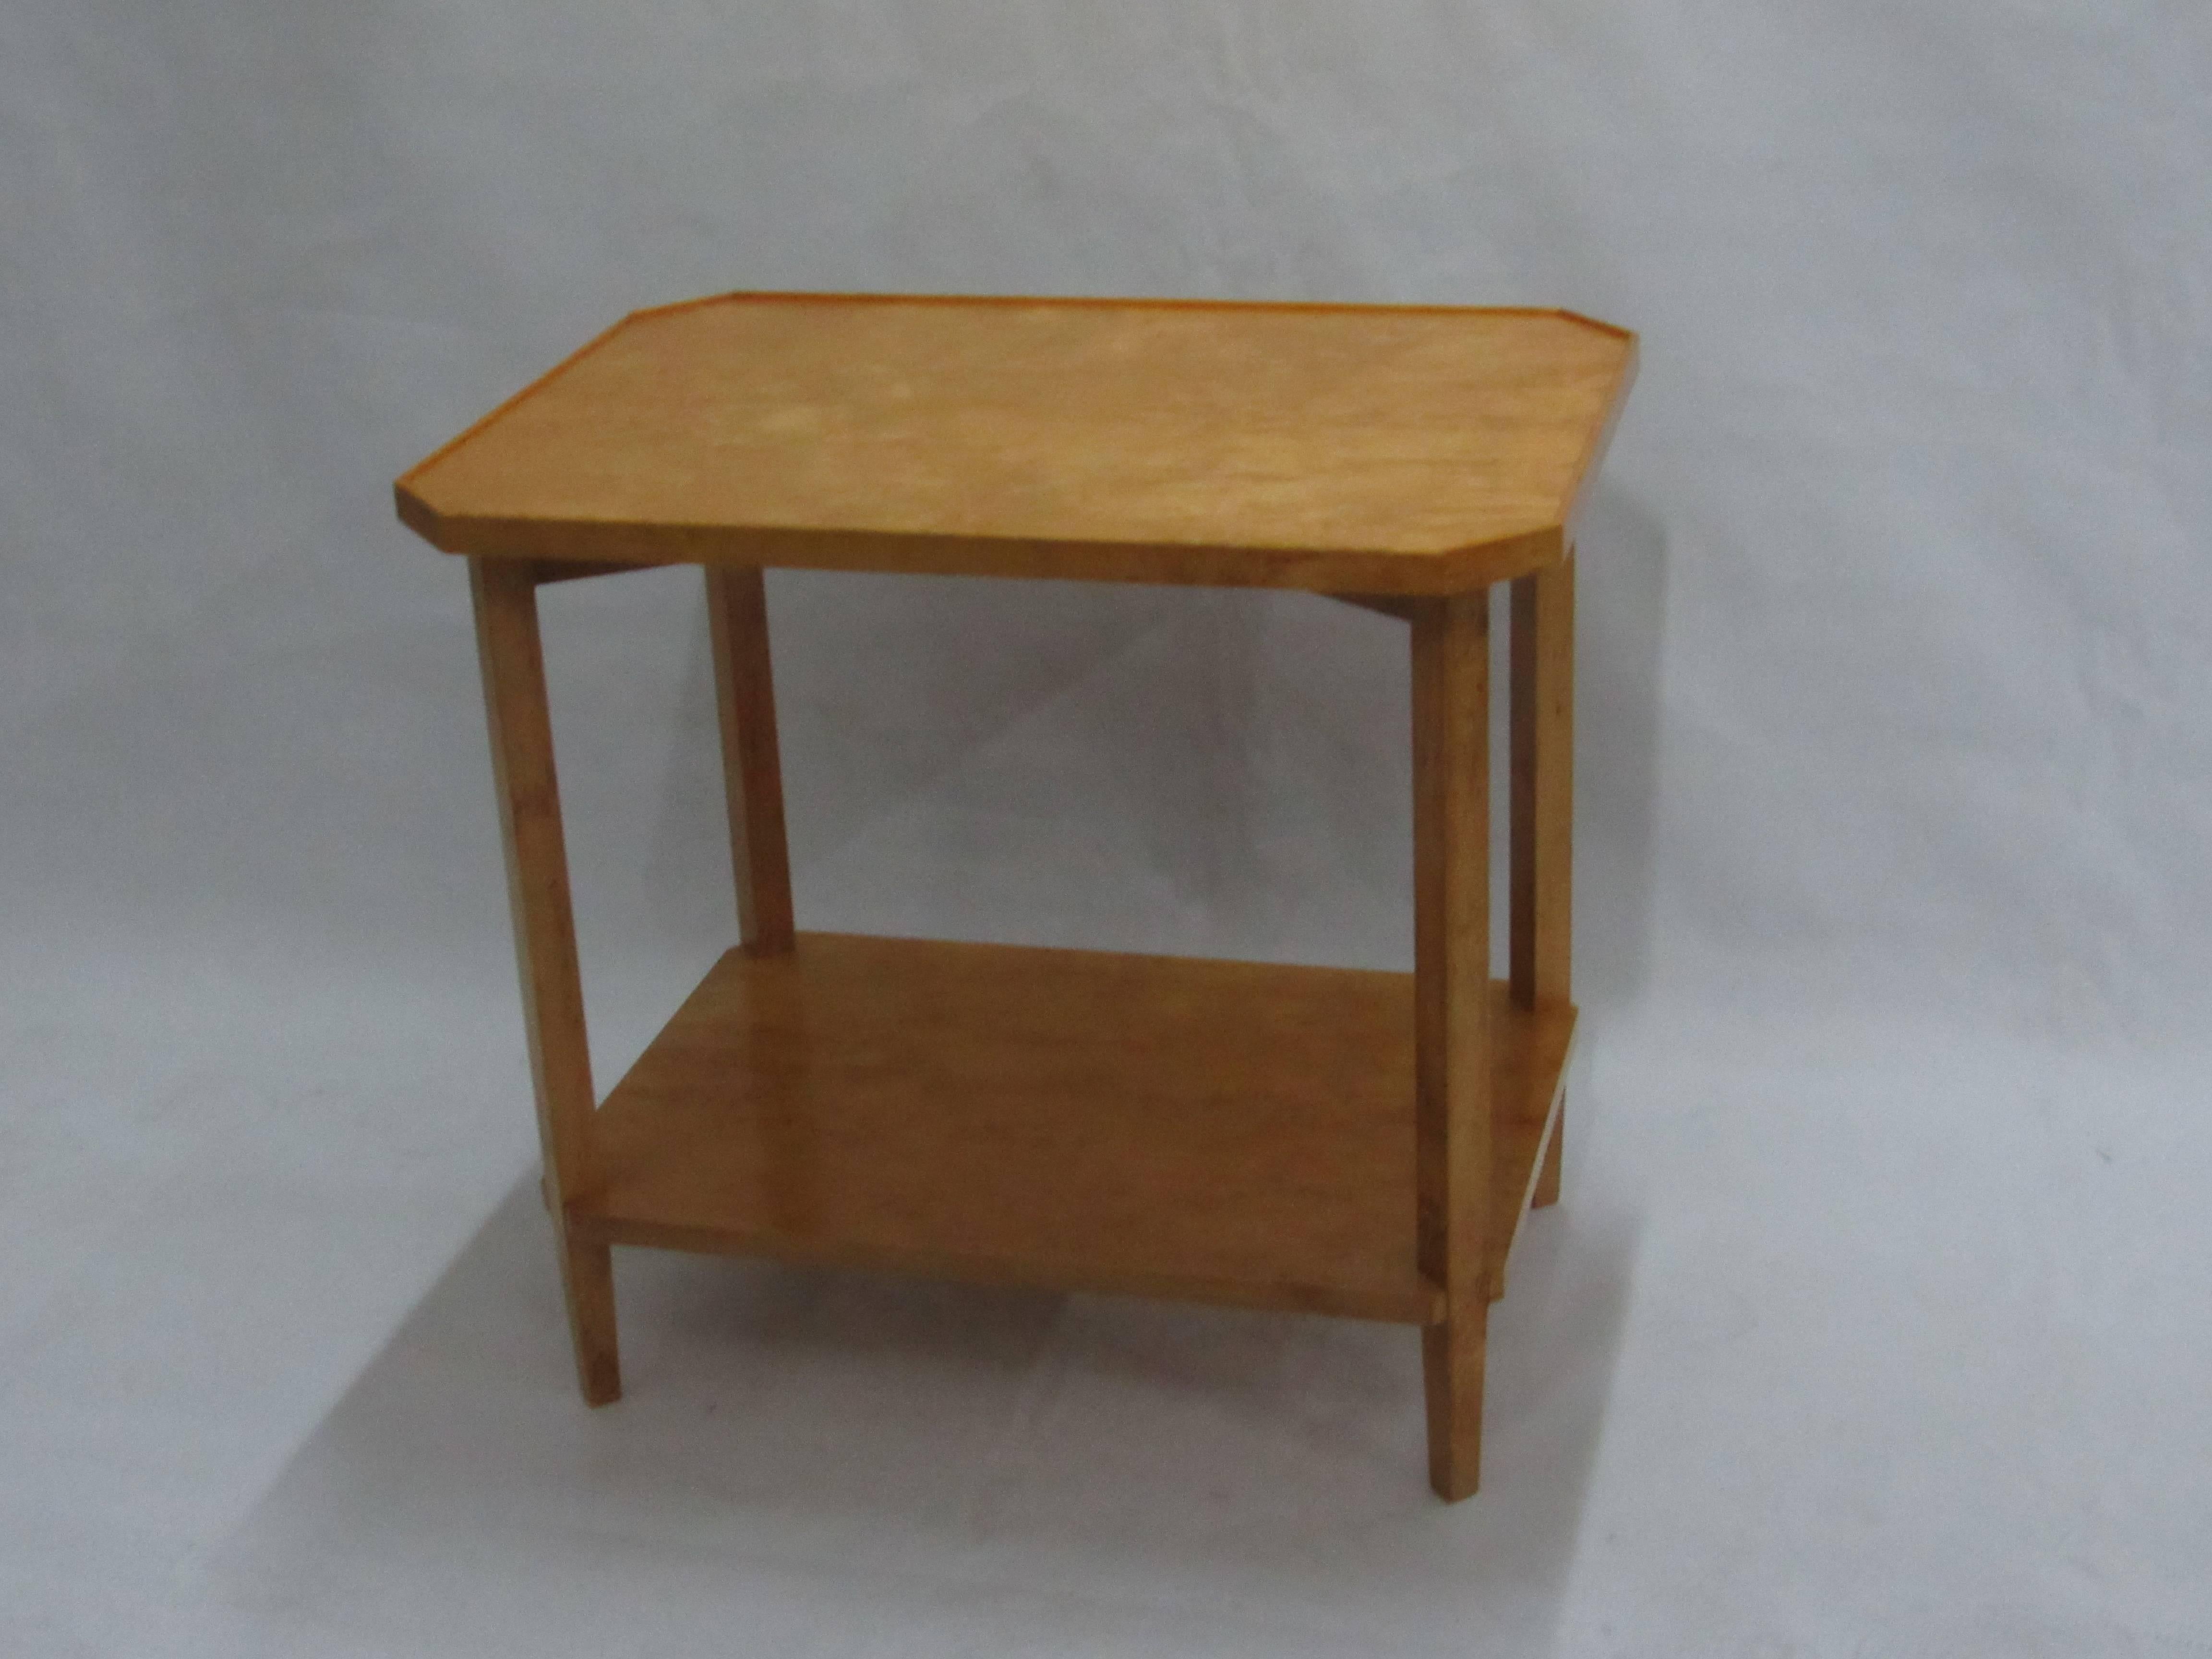 Rectangular wooden side table designed by Peter Marino and created for him.